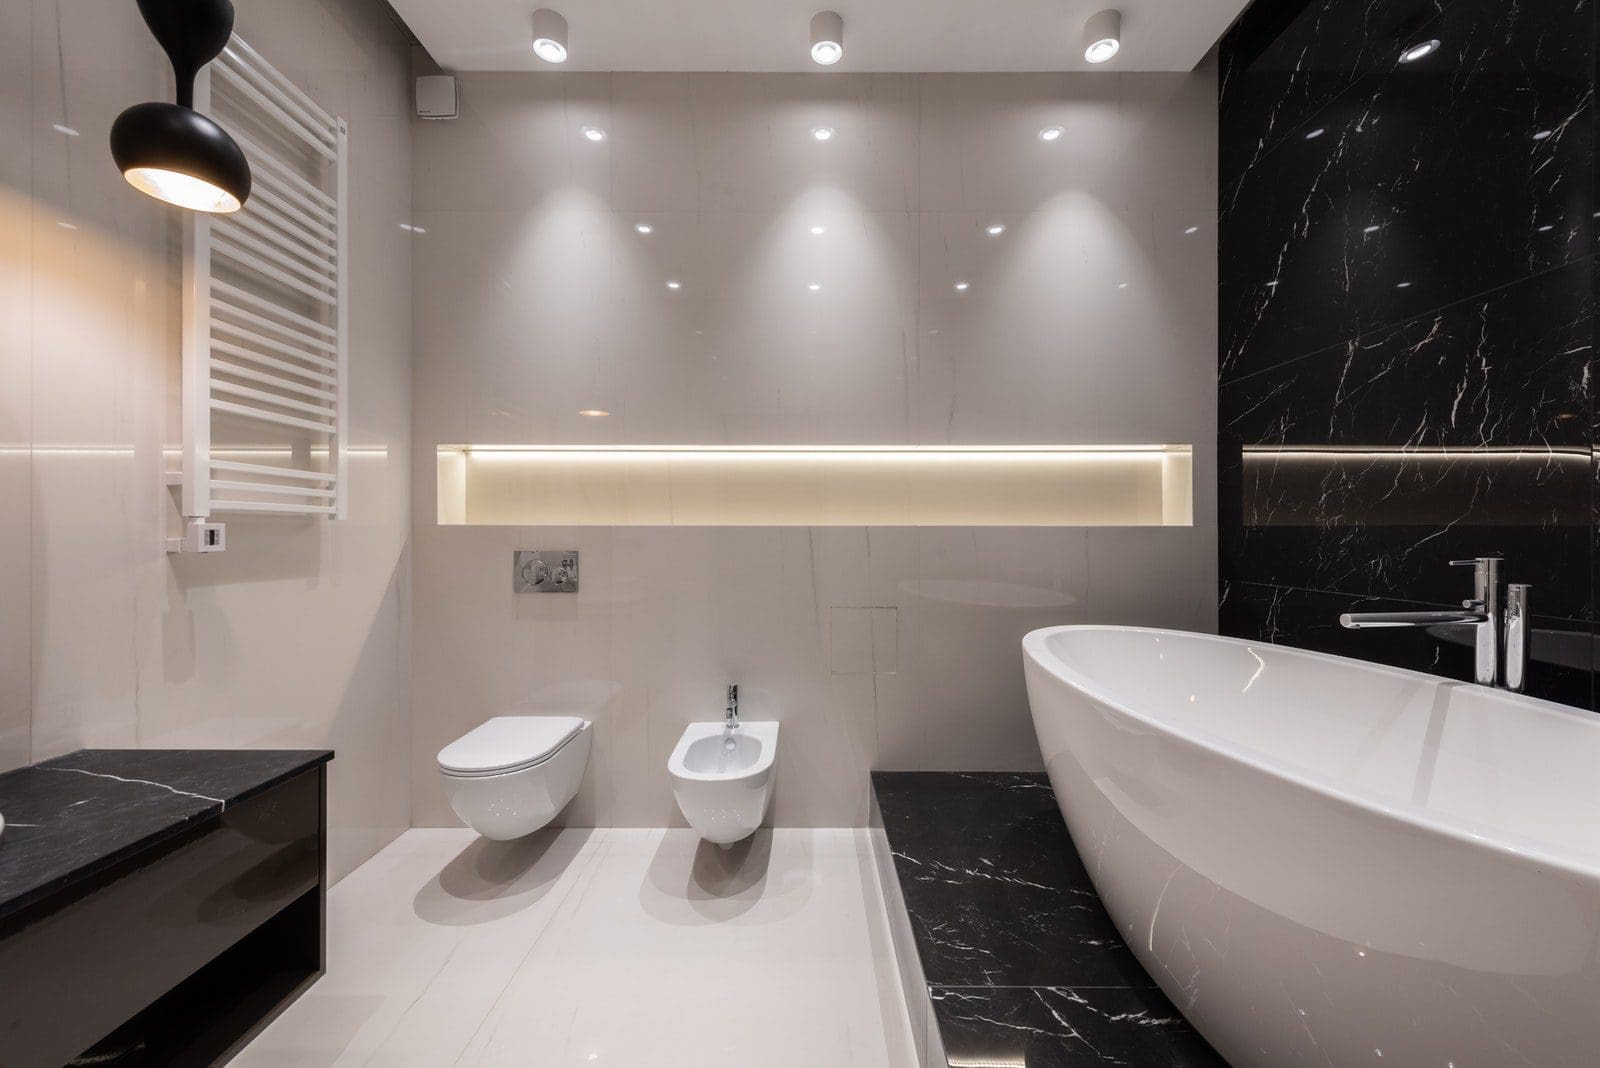 Bathroom interior with white and black tile